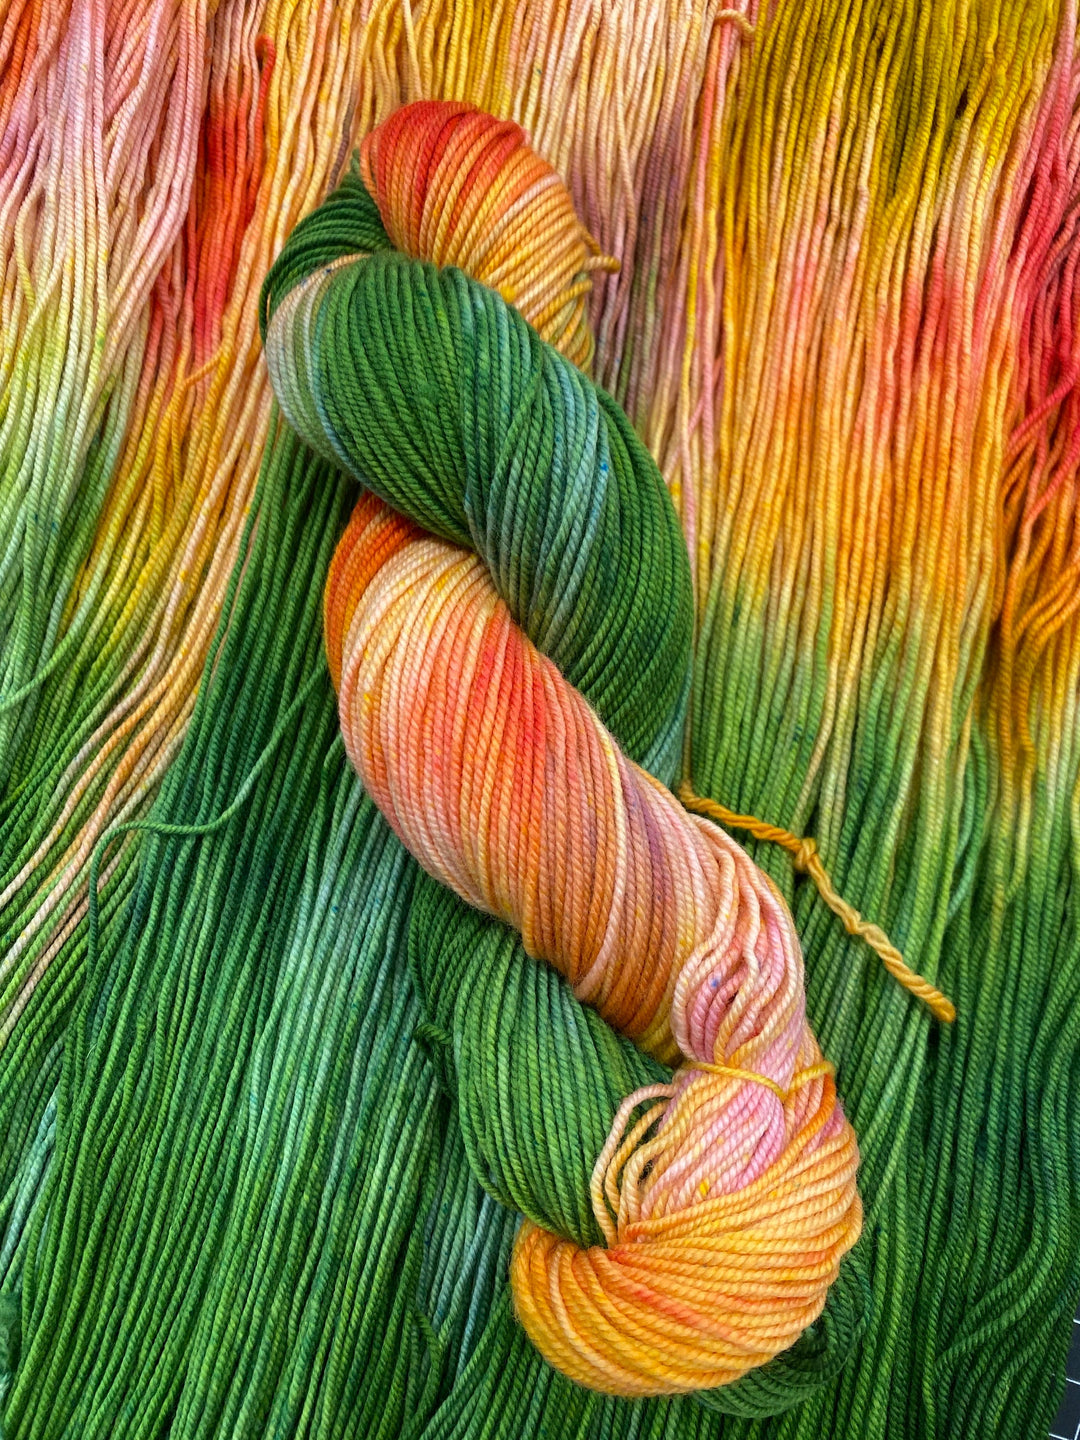 Get a Chard On - Hand dyed yarn - Mohair - Fingering - Sock - DK - Sport - Worsted - Bulky - Variegated Yarn